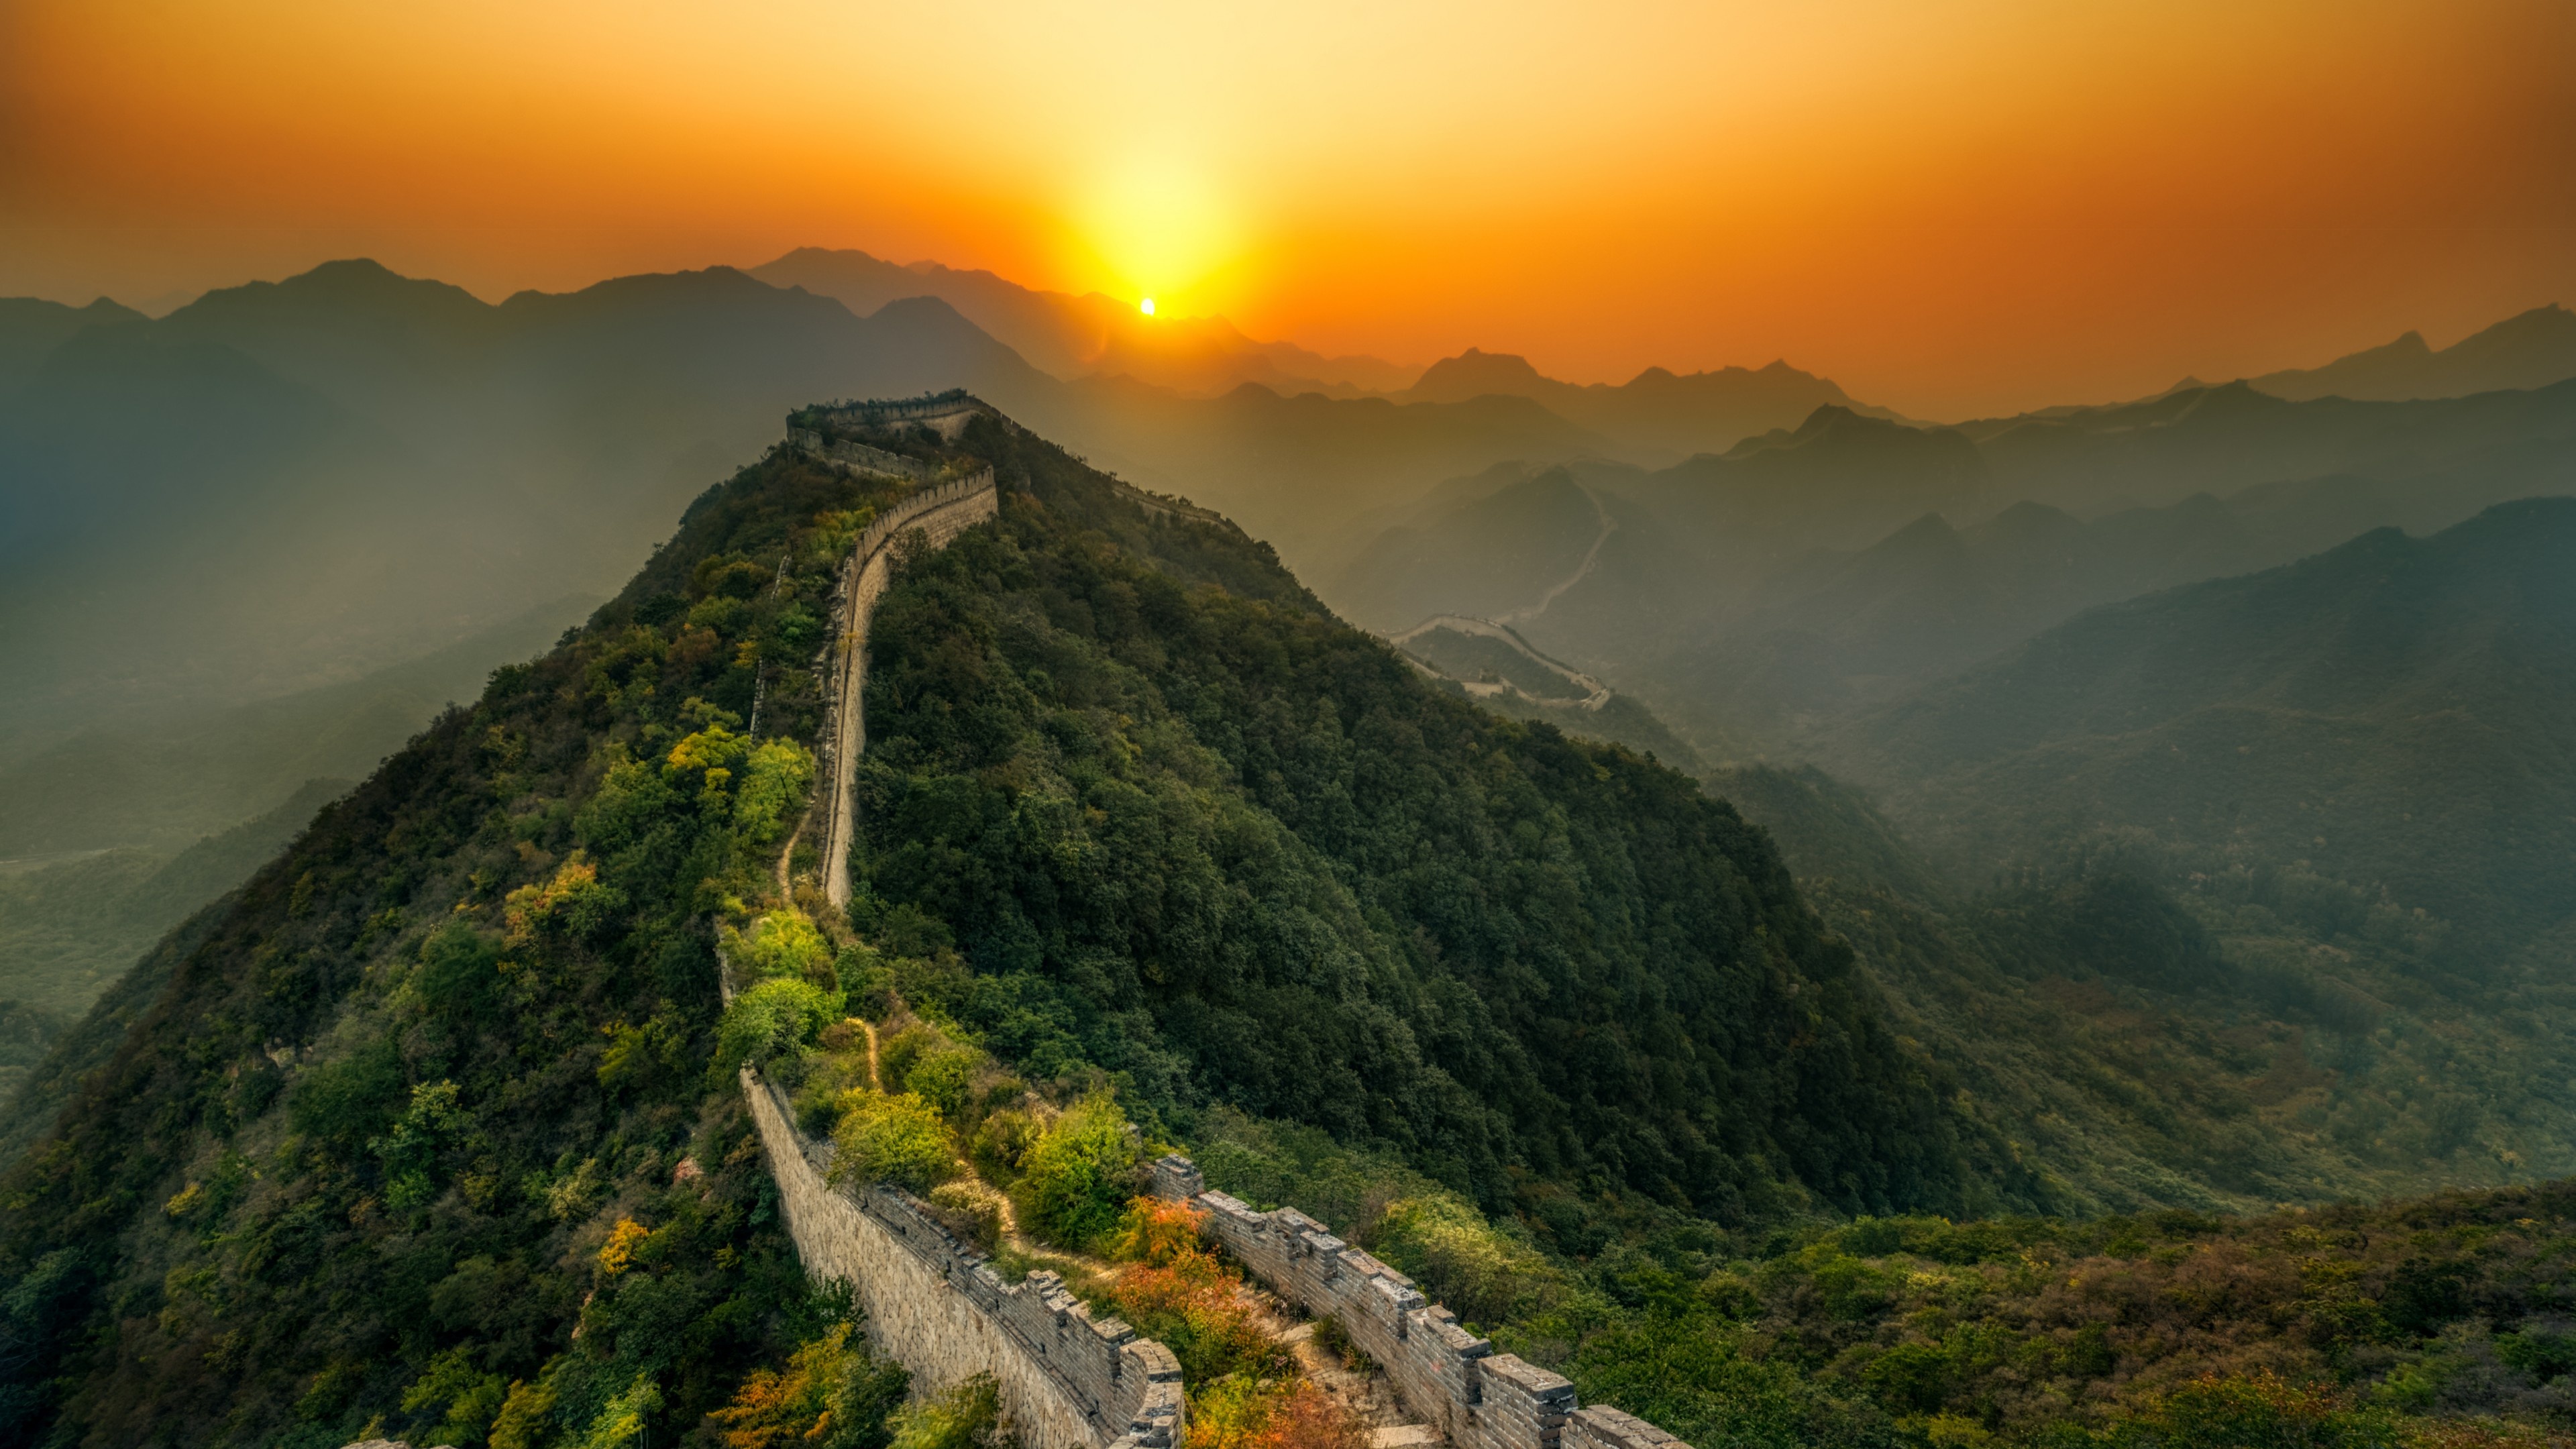 Great Wall of China: A series of fortifications that were built across the historical northern borders of ancient realm. 3840x2160 4K Wallpaper.